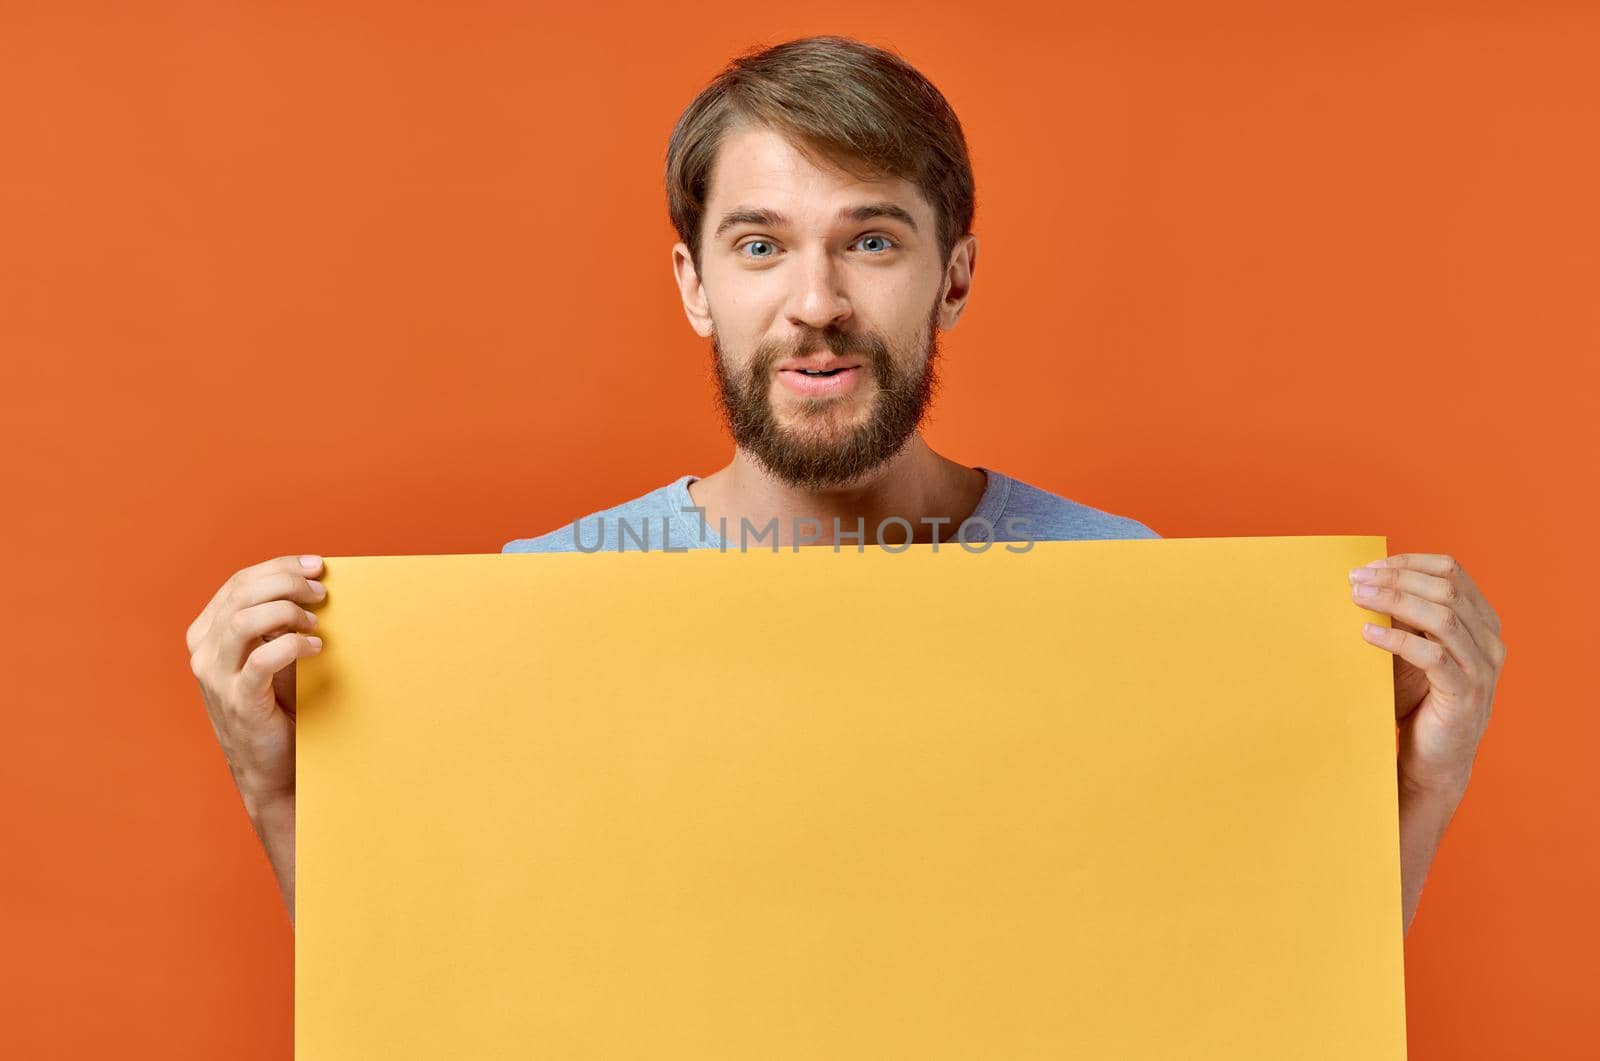 emotional man holding a yellow banner design studio lifestyle. High quality photo